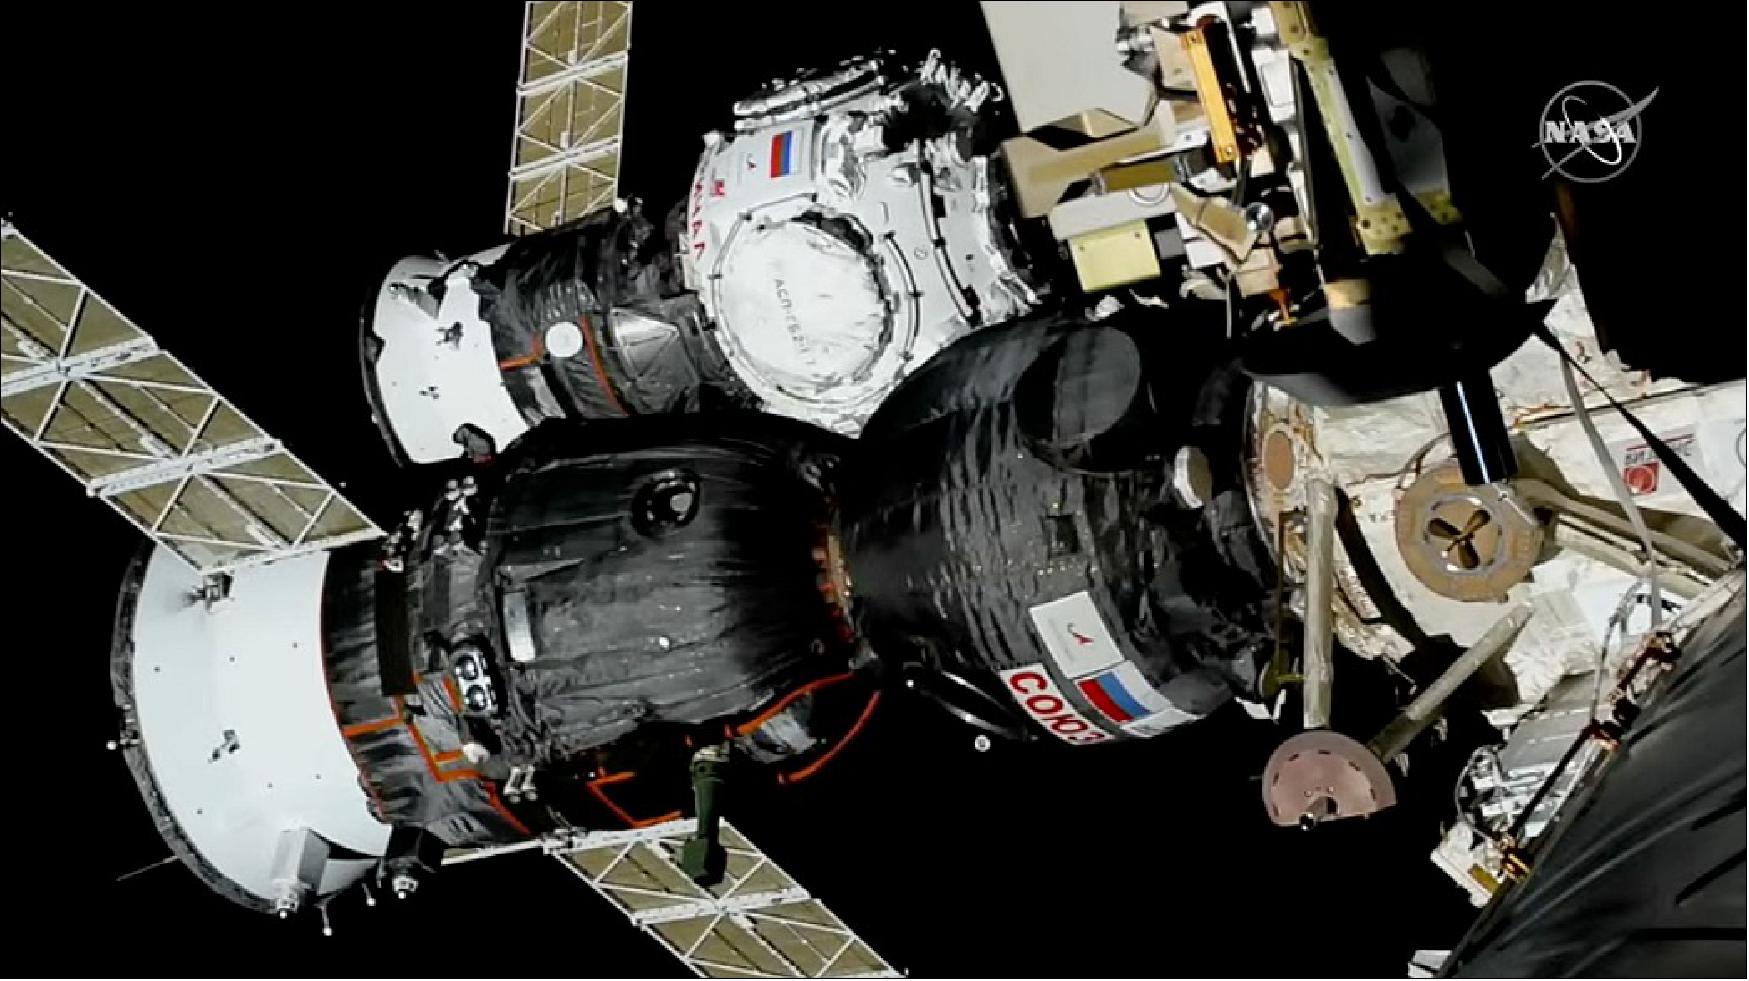 Figure 10: Roscosmos attaches the new docking node Prichal (top vehicle in the image) to Russian Segment of the ISS (image credit: NASA TV)